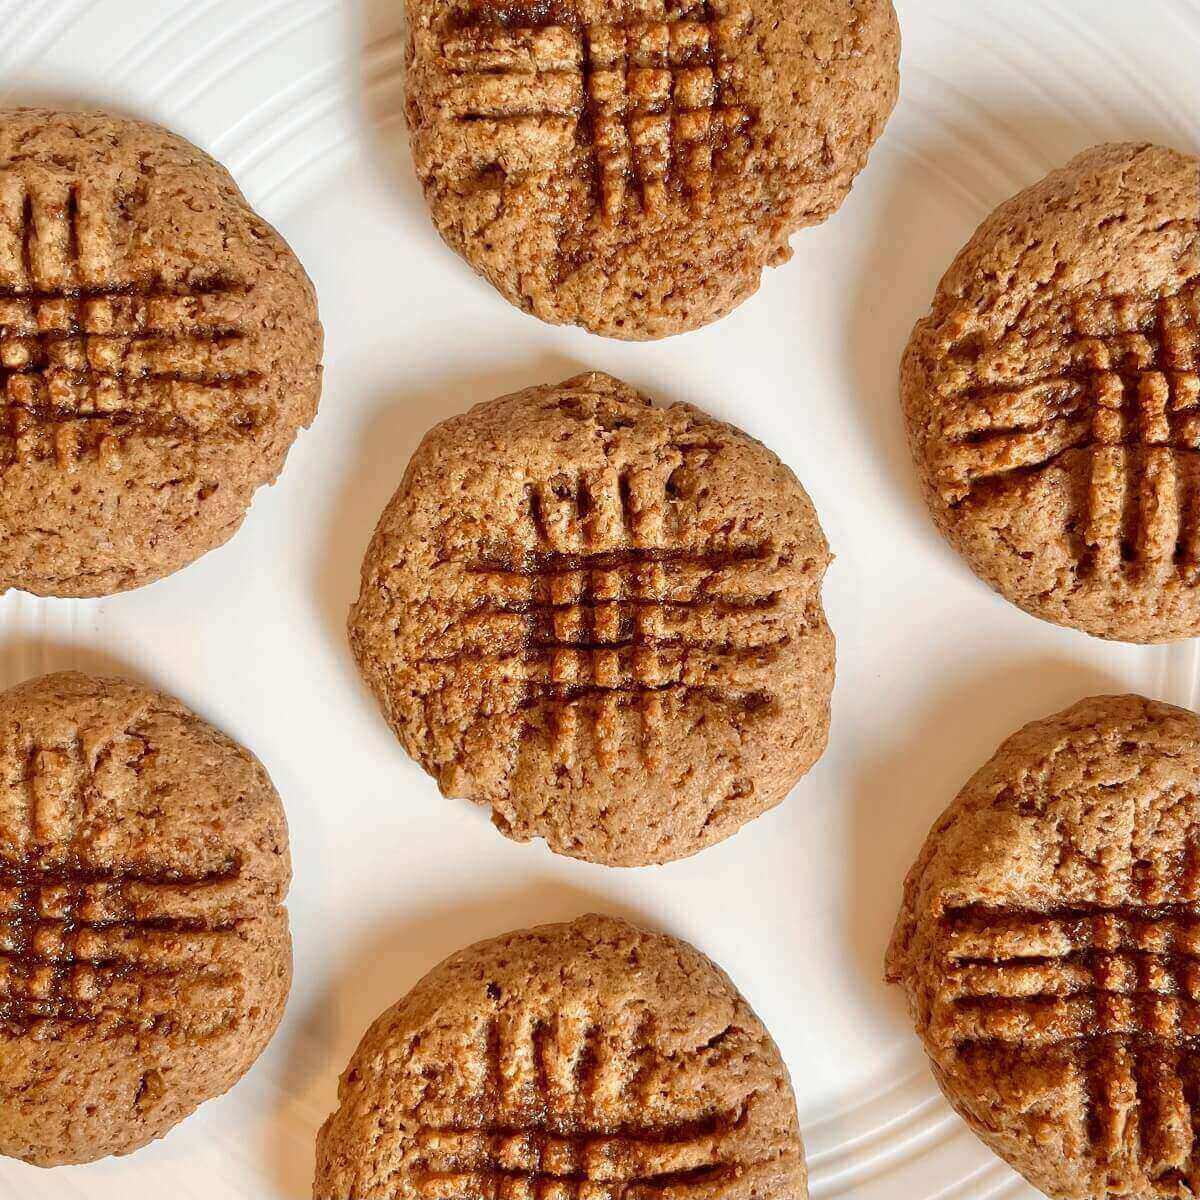 Seven vegan almond butter cookies on a white plate.